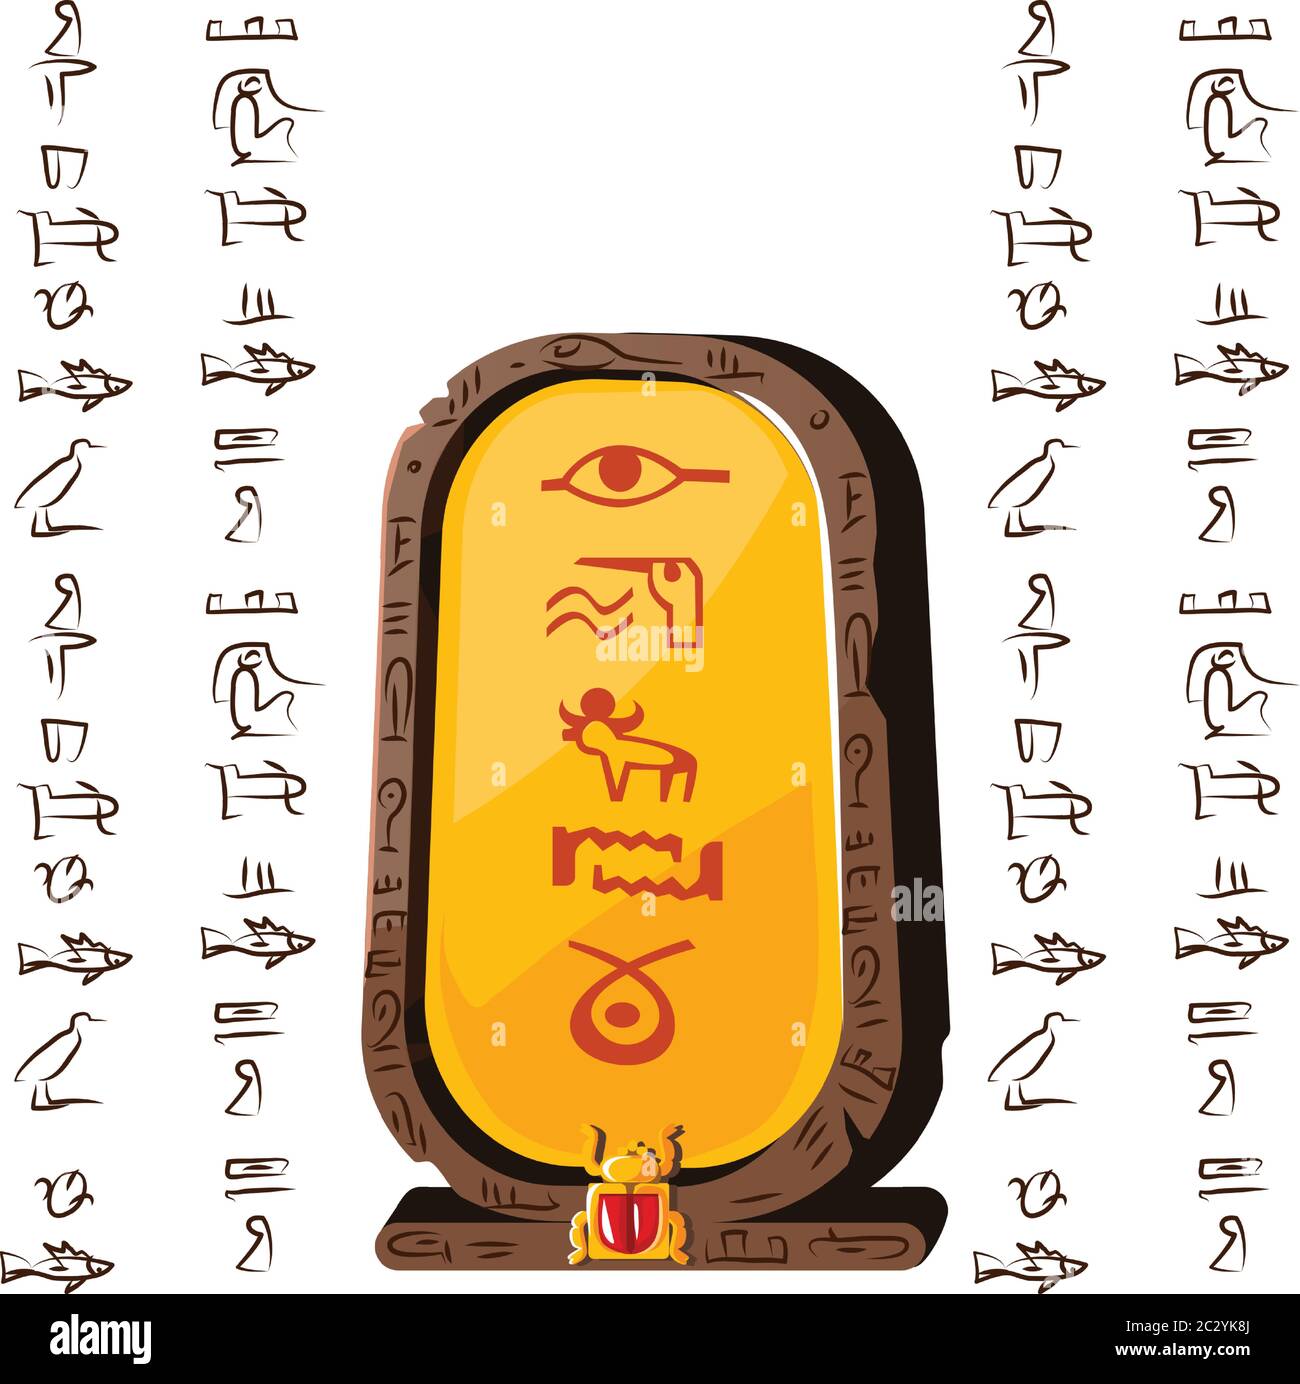 Stone board or clay tablet and Egyptian hieroglyphs cartoons vector illustration Ancient object for recording storing information, graphical user inte Stock Vector